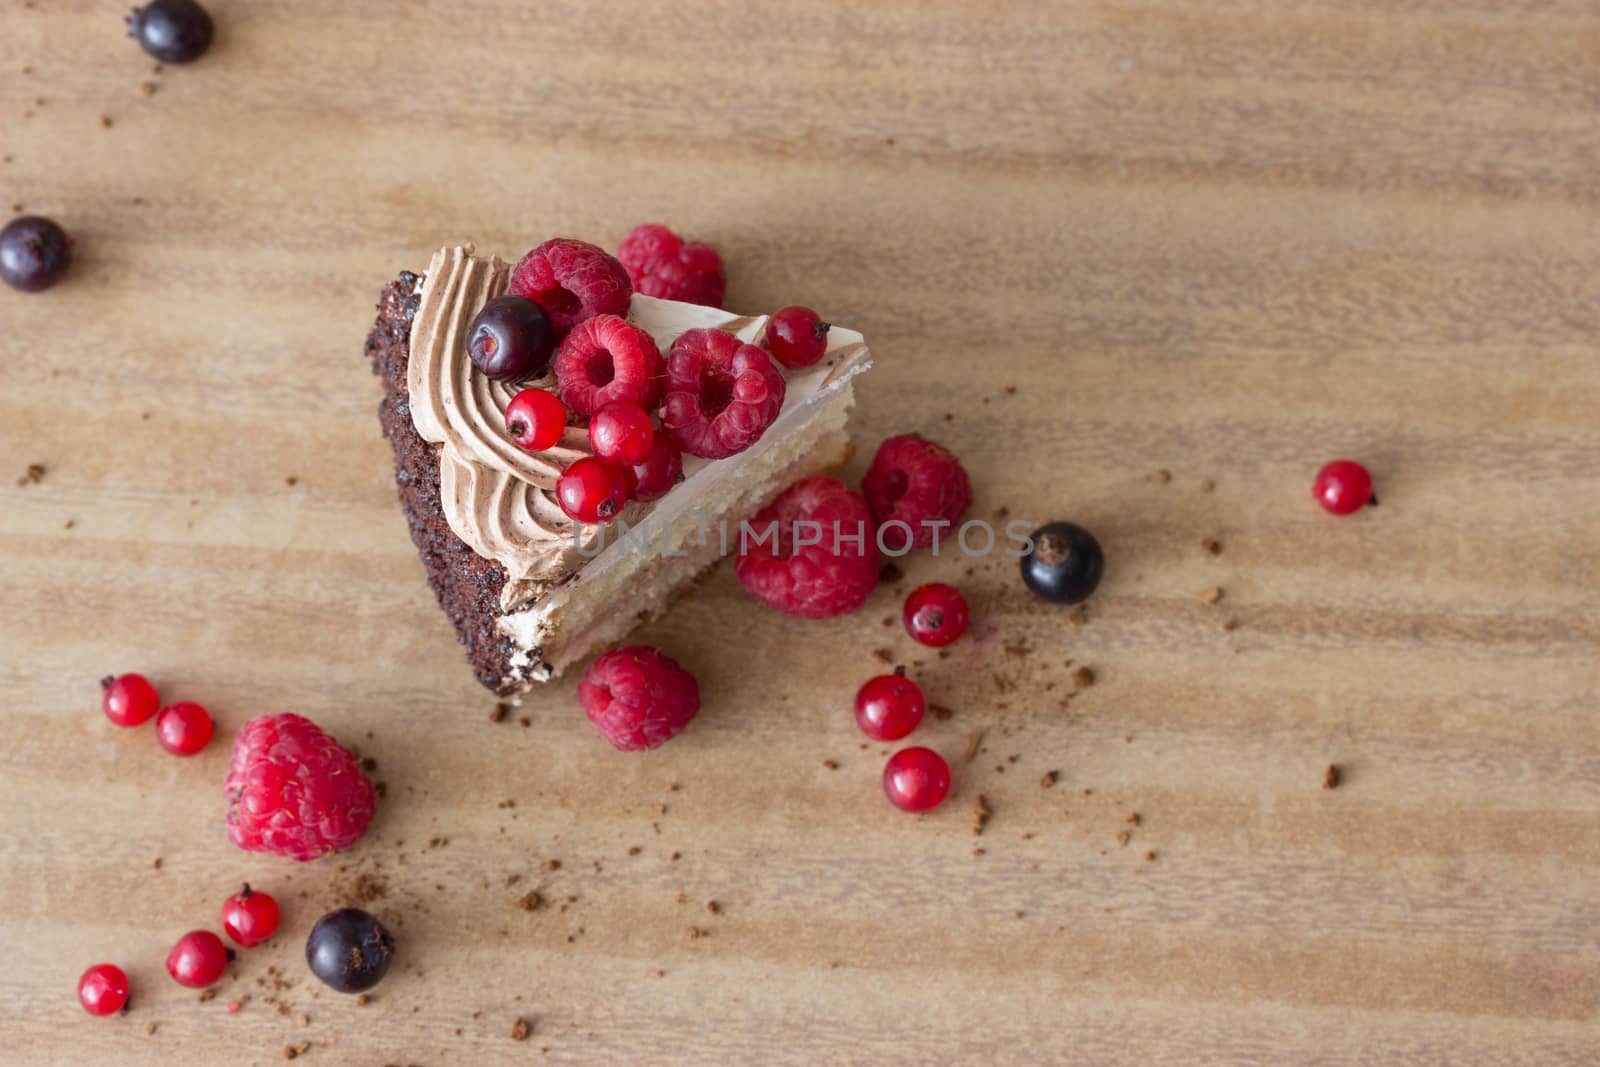 peace of cake decorated with fresh berries